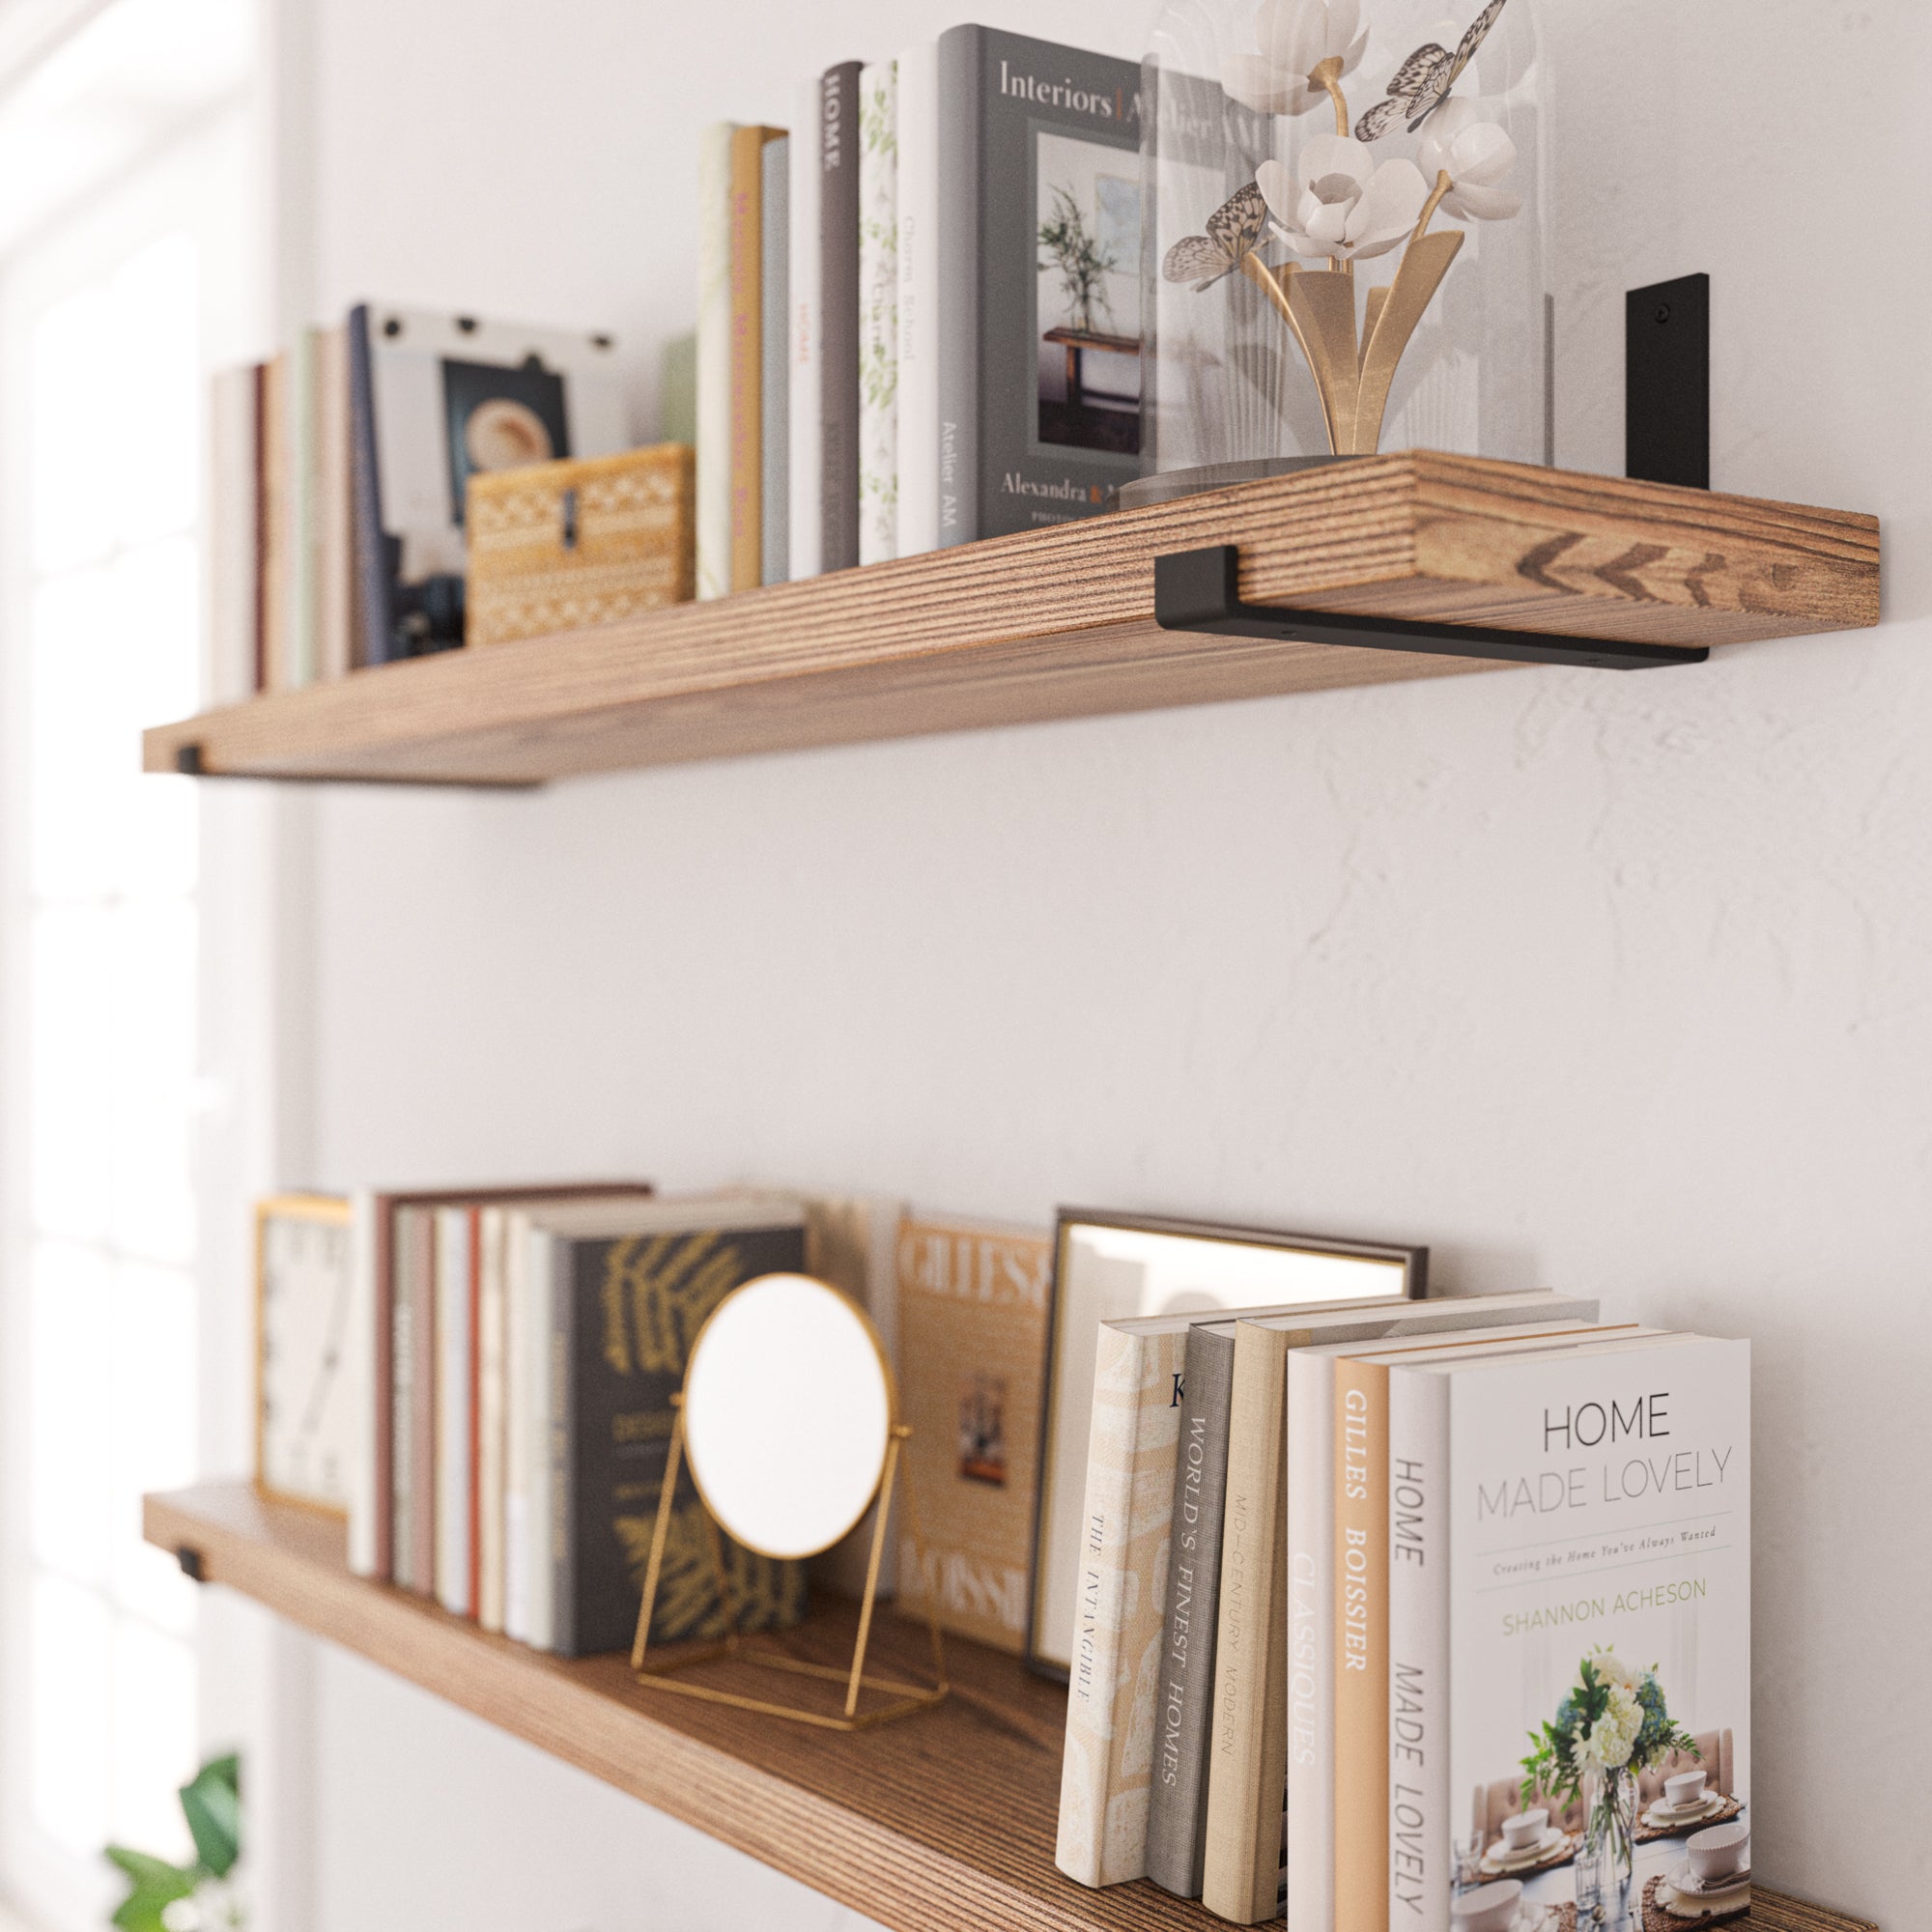 A close-up image of stylish books, frame, and clock on two storage shelves burnt.